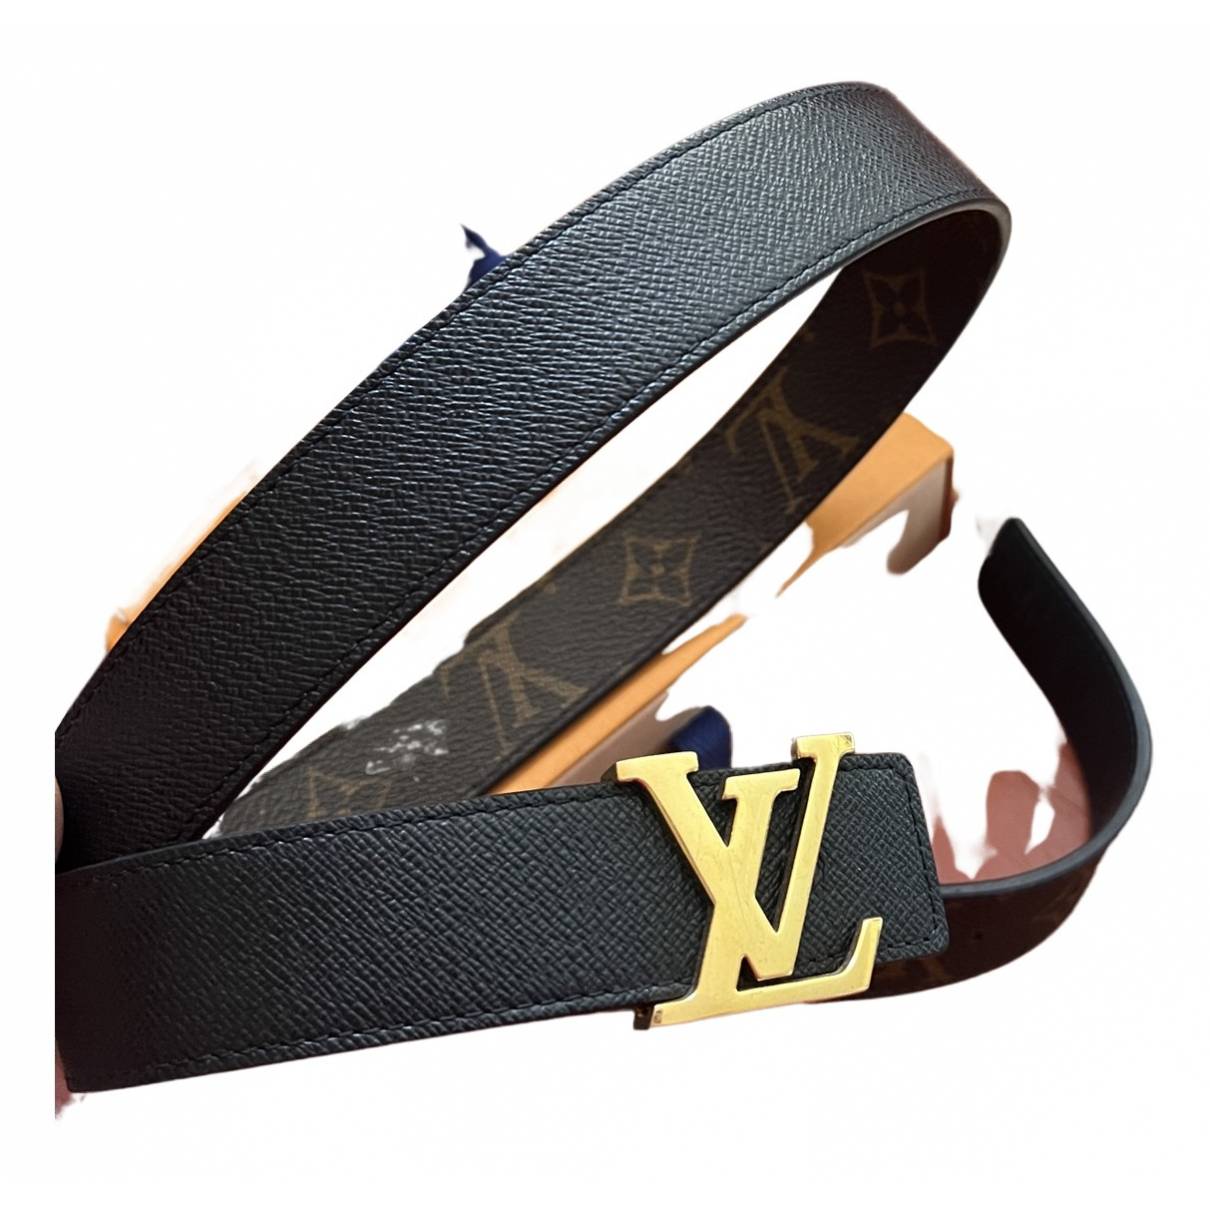 Initiales leather belt Louis Vuitton Black size 80 cm in Leather